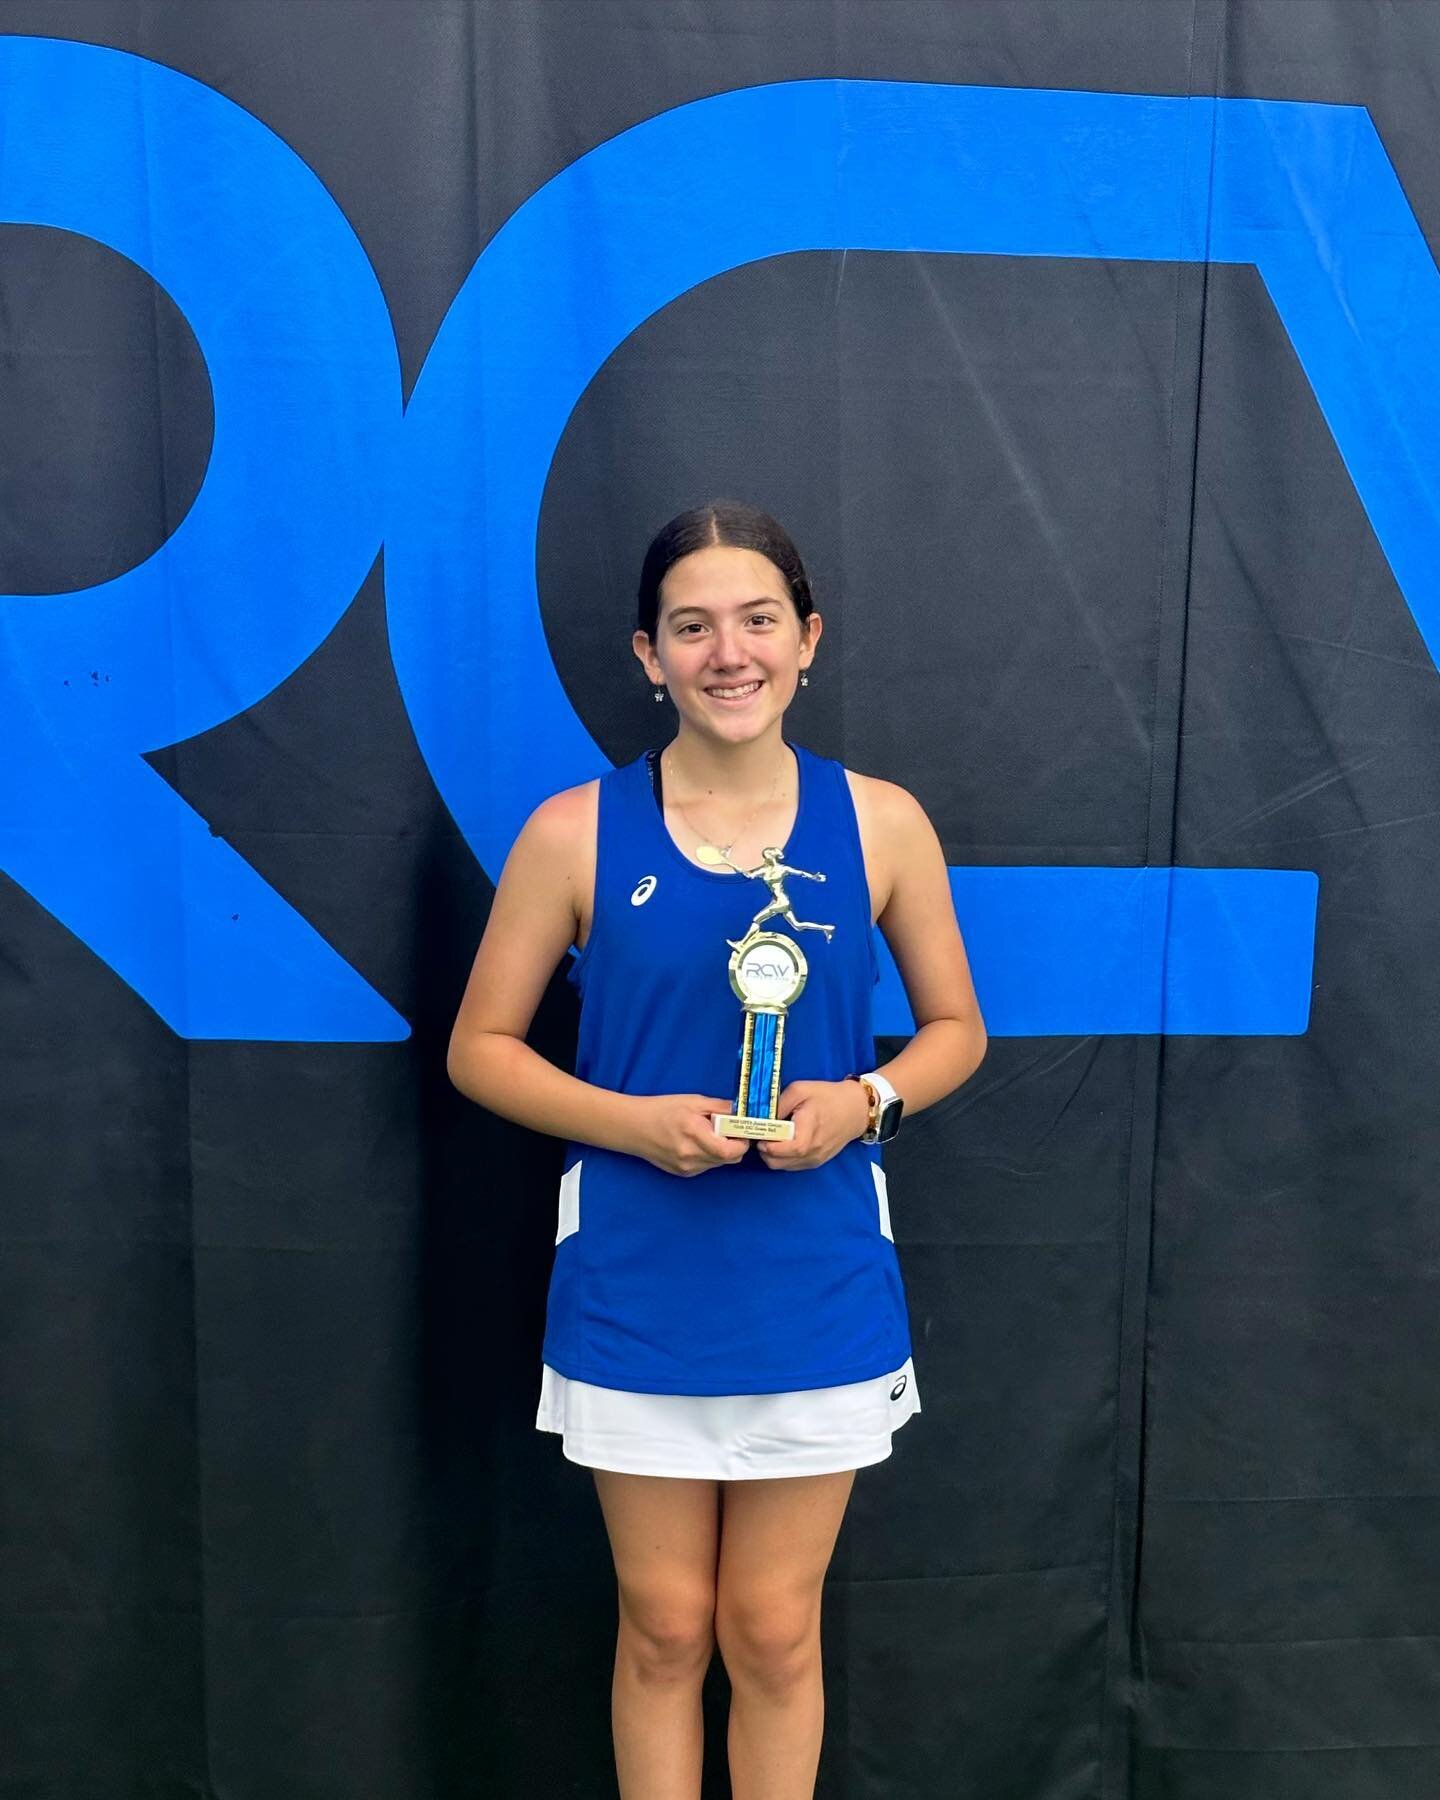 🏆 Another triumph for young player Avery O.! 

🥇Crushing the competition in yet another Pennsylvania tournament for the under 10s years old category. 

🌟 With the guidance of Coach Anastasia, Avery is improving her skills during her private lesson